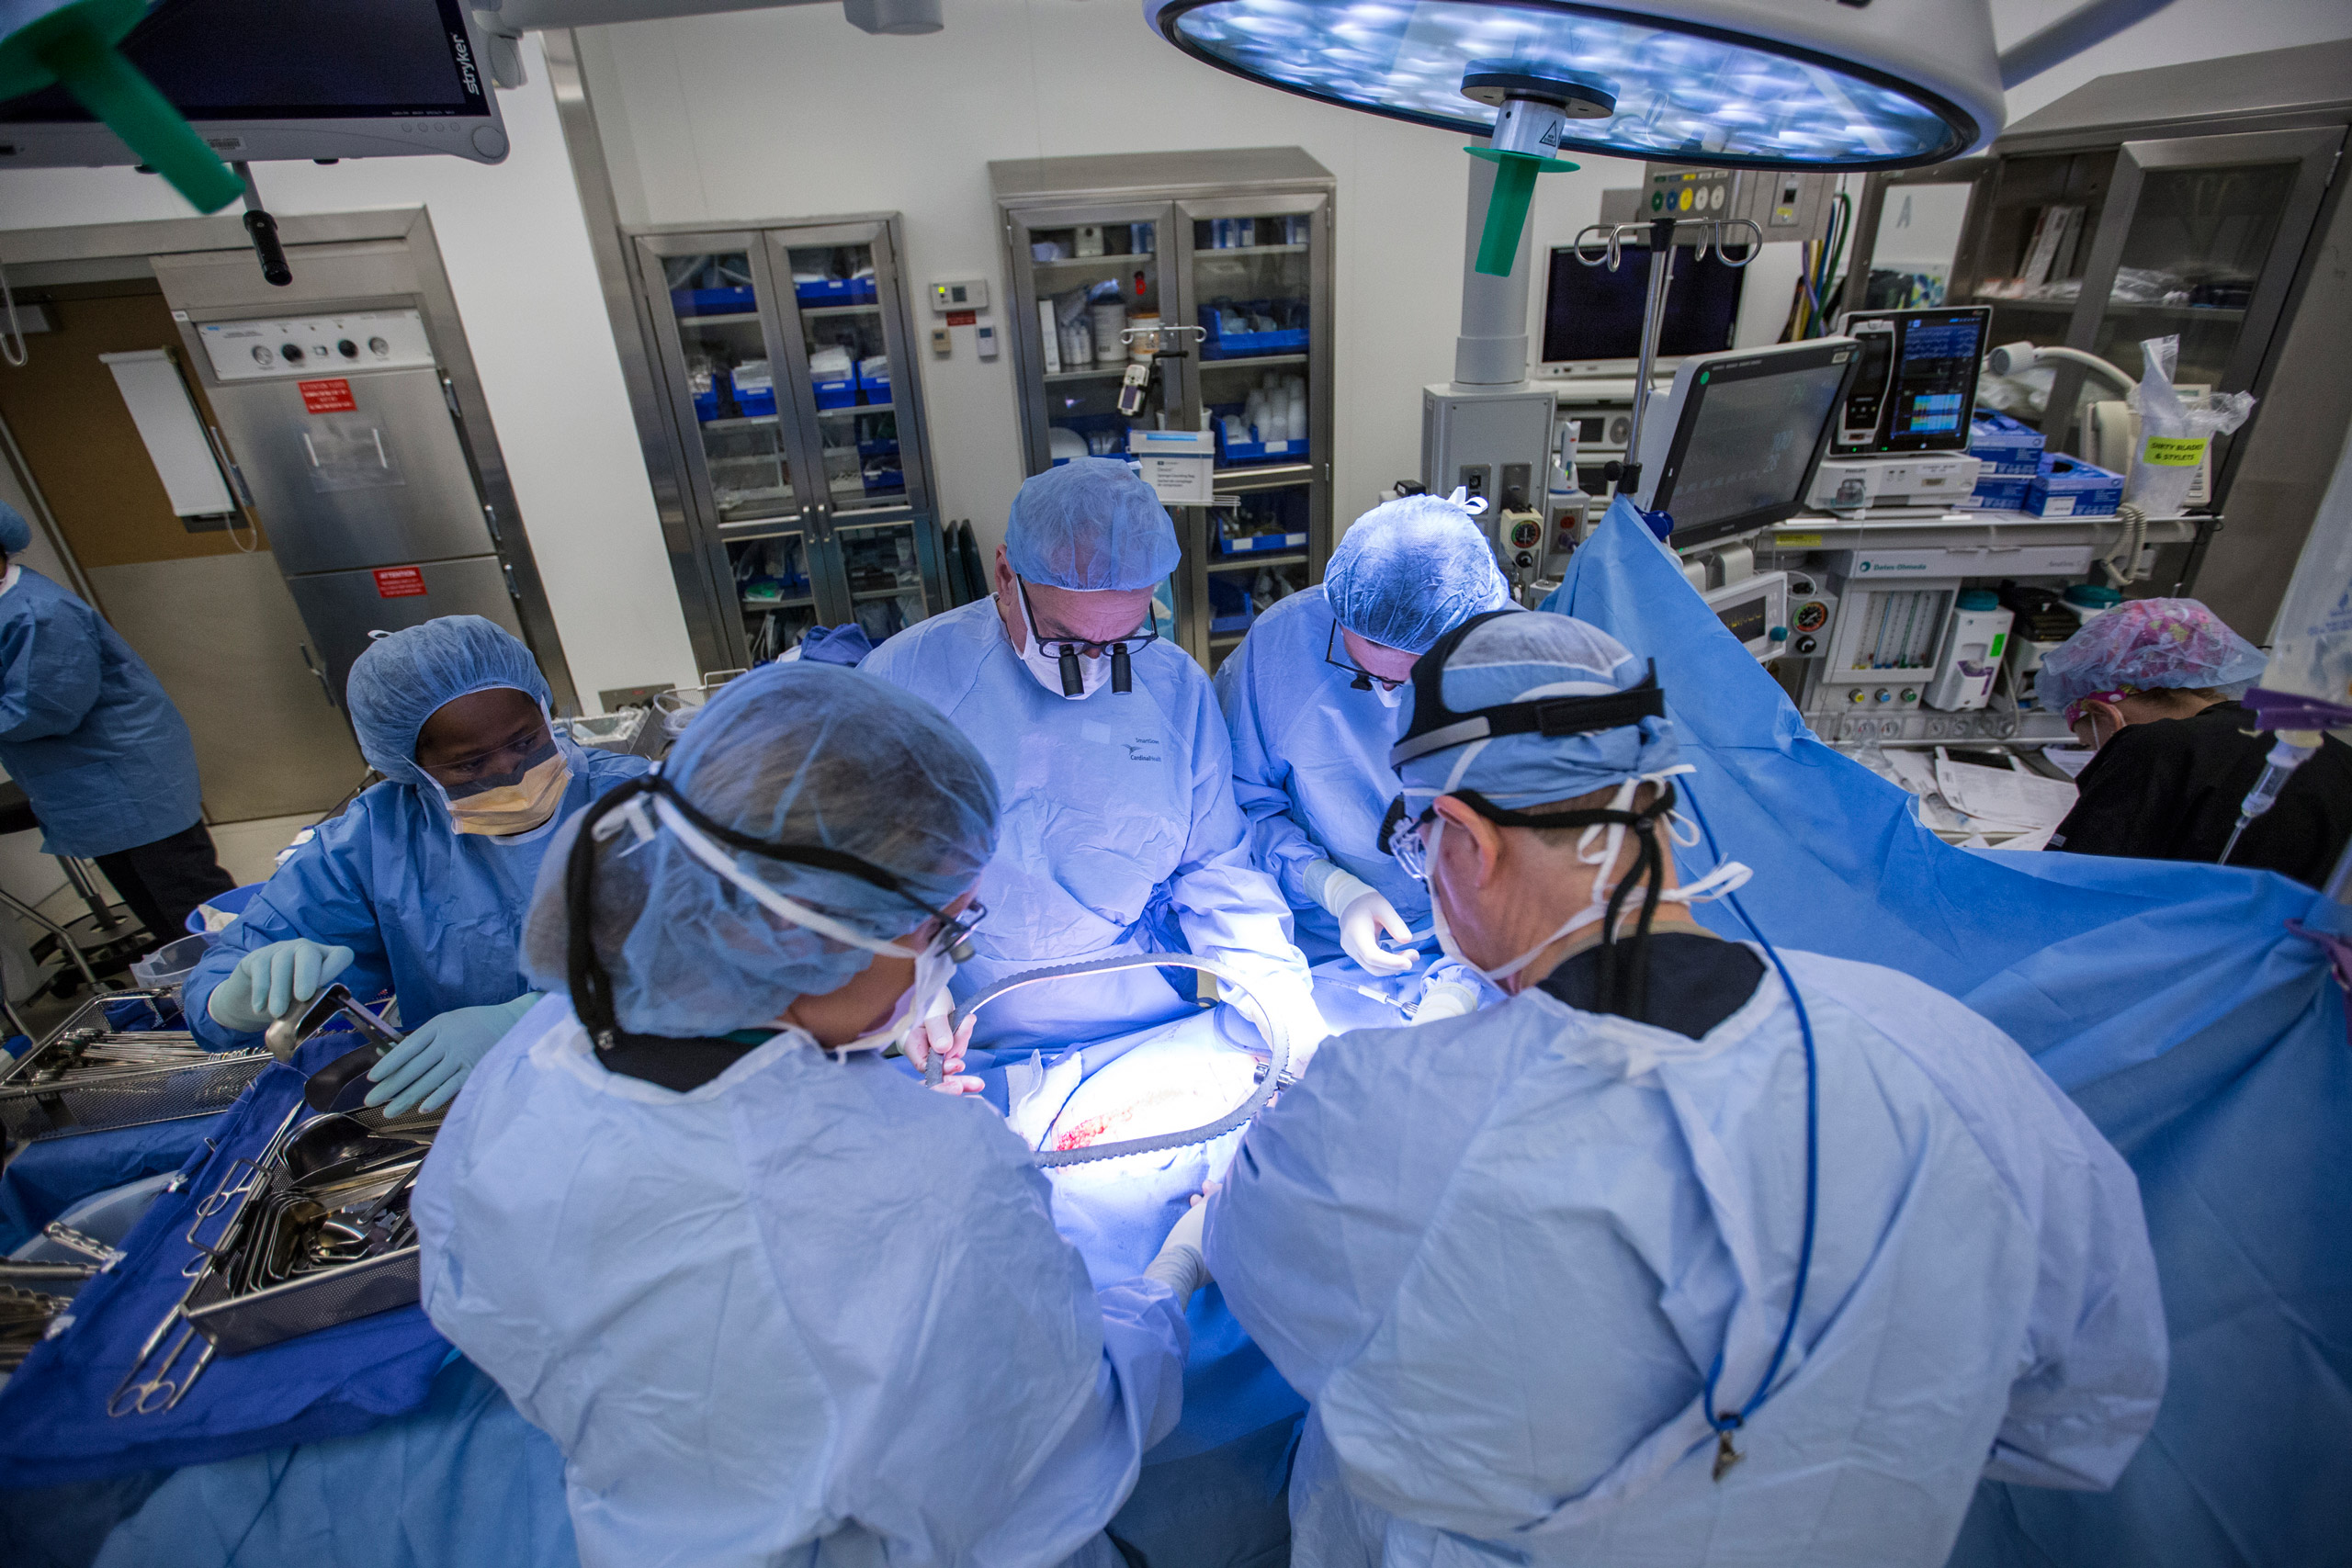 From left to right: Dr. Greg McKenna, Dr. Giuliano Testa, Dr. E. Colin Koon, and Dr. Liza Johannesson perform a womb transplant surgery at Baylor University Medical Center on Sept. 14, 2016. (Shannon Faulk—Baylor University Medical Center)